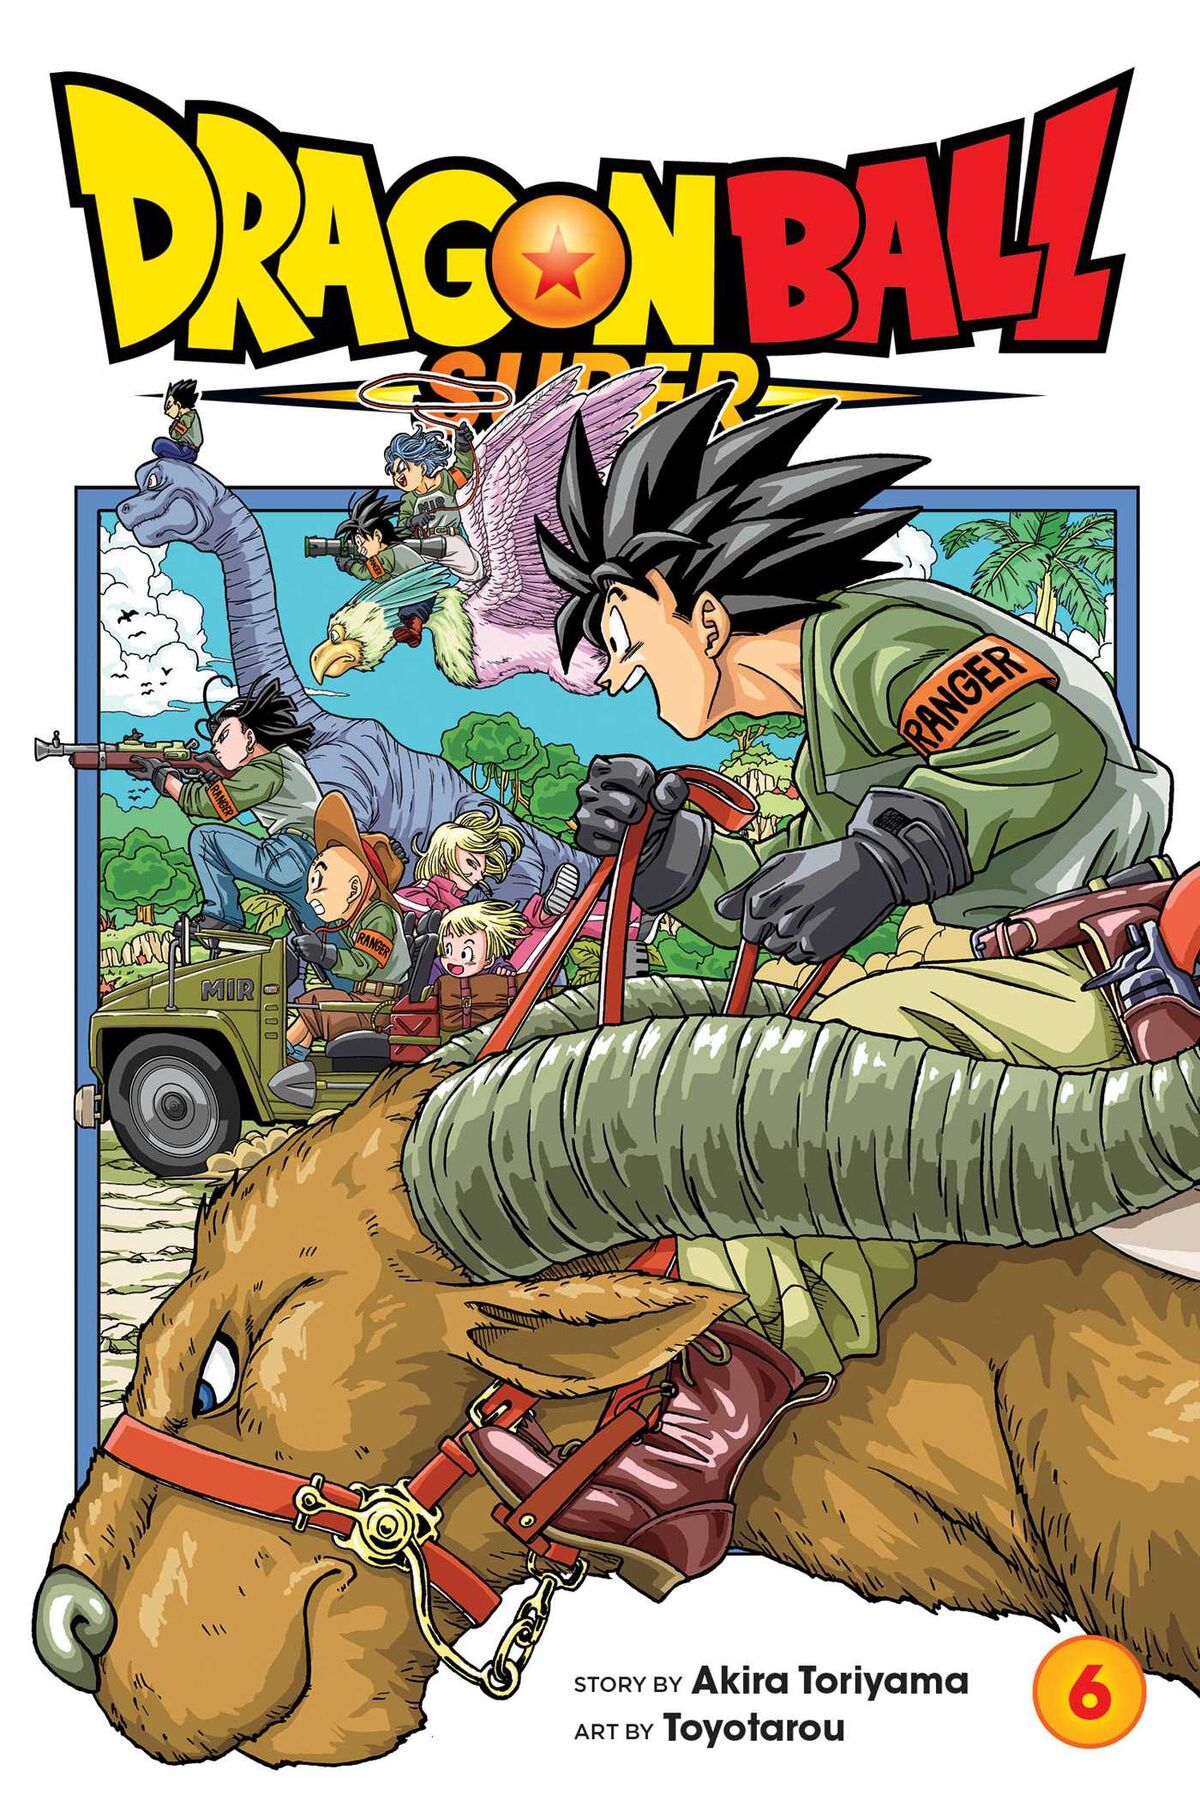 The Story Enters the SUPER HERO Arc! Volume 21 of the Dragon Ball Super  Manga On Sale Now!]